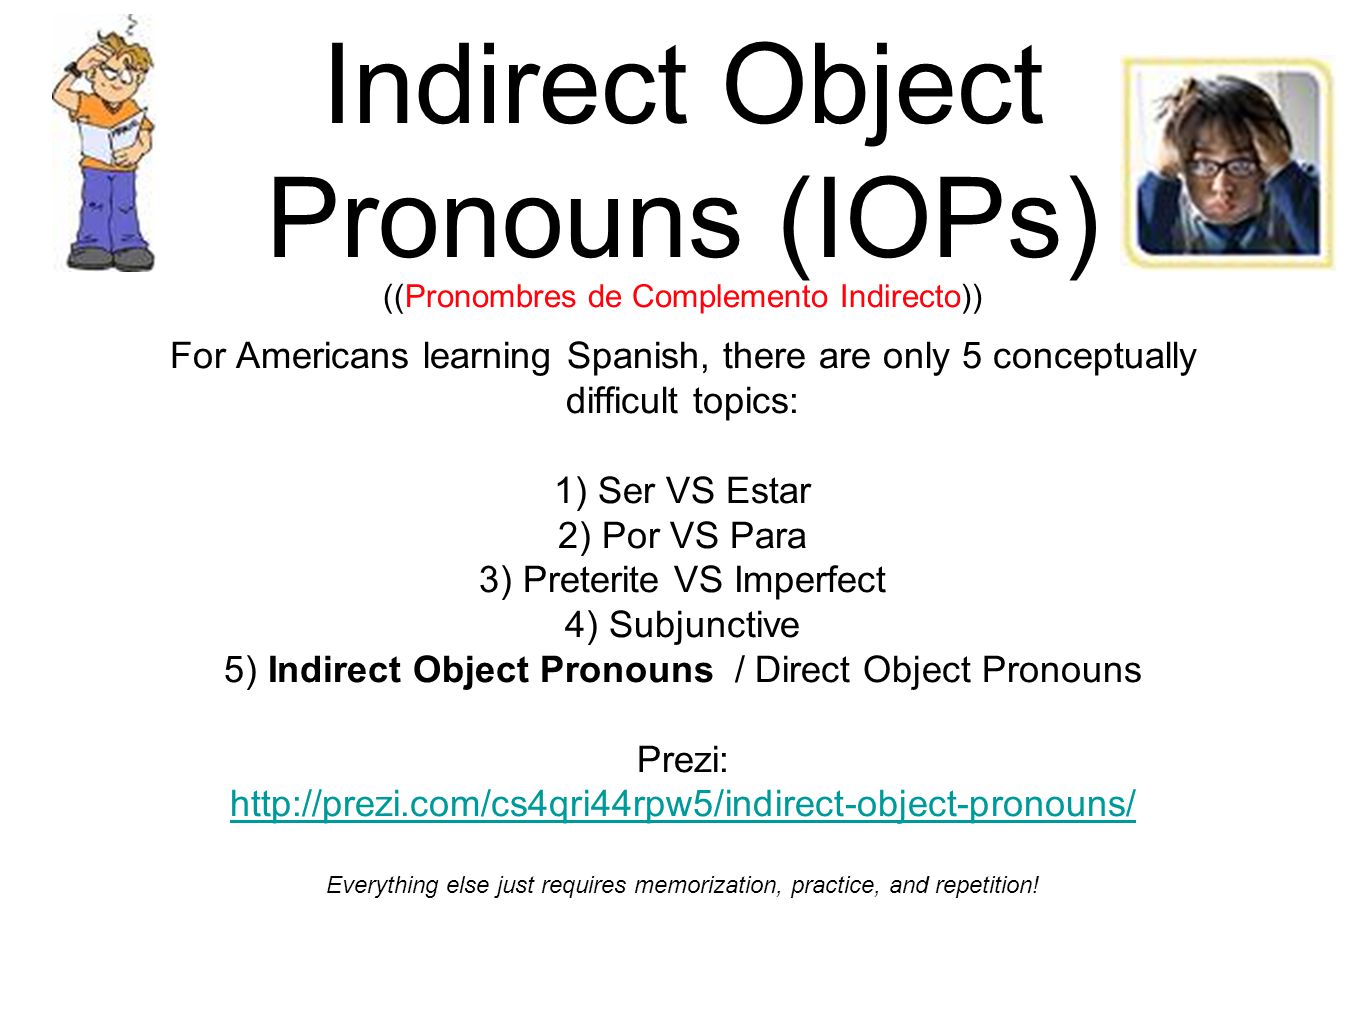 Indirect Object Pronouns (IOPs) ((Pronombres de Complemento Indirecto)) For Americans learning Spanish, there are only 5 conceptually difficult topics: 1) Ser VS Estar 2) Por VS Para 3) Preterite VS Imperfect 4) Subjunctive 5) Indirect Object Pronouns / Direct Object Pronouns Prezi:   Everything else just requires memorization, practice, and repetition!